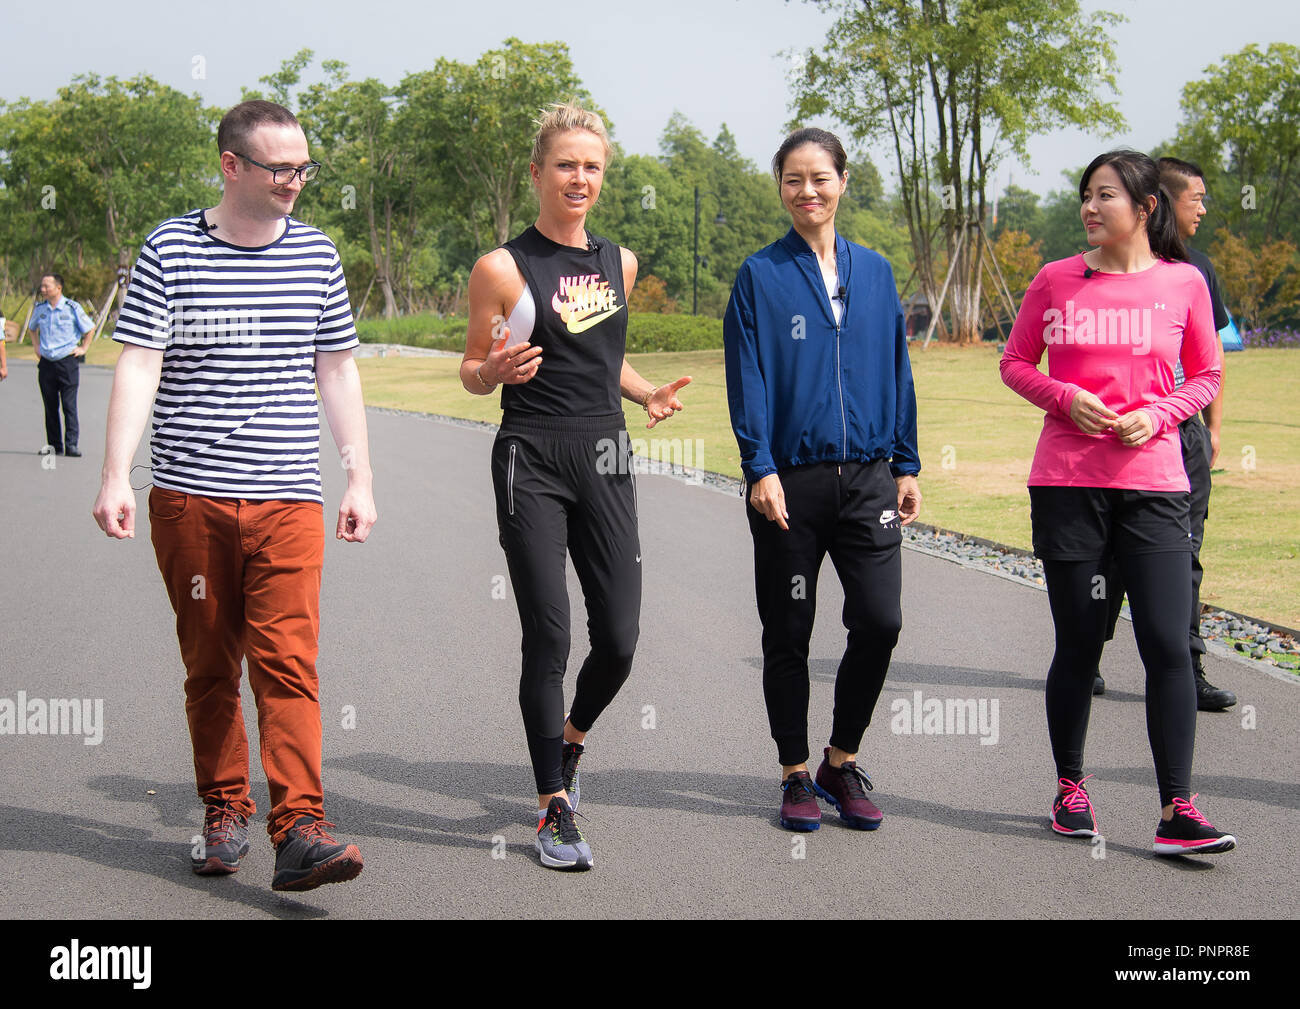 September 22, 2018 - Elina Svitolina of the Ukraine & Li Na of China head out to play tennis on the East Lake ahead of the 2018 Dongfeng Motor Wuhan Open WTA Premier 5 tennis tournament Credit: AFP7/ZUMA Wire/Alamy Live News Stock Photo